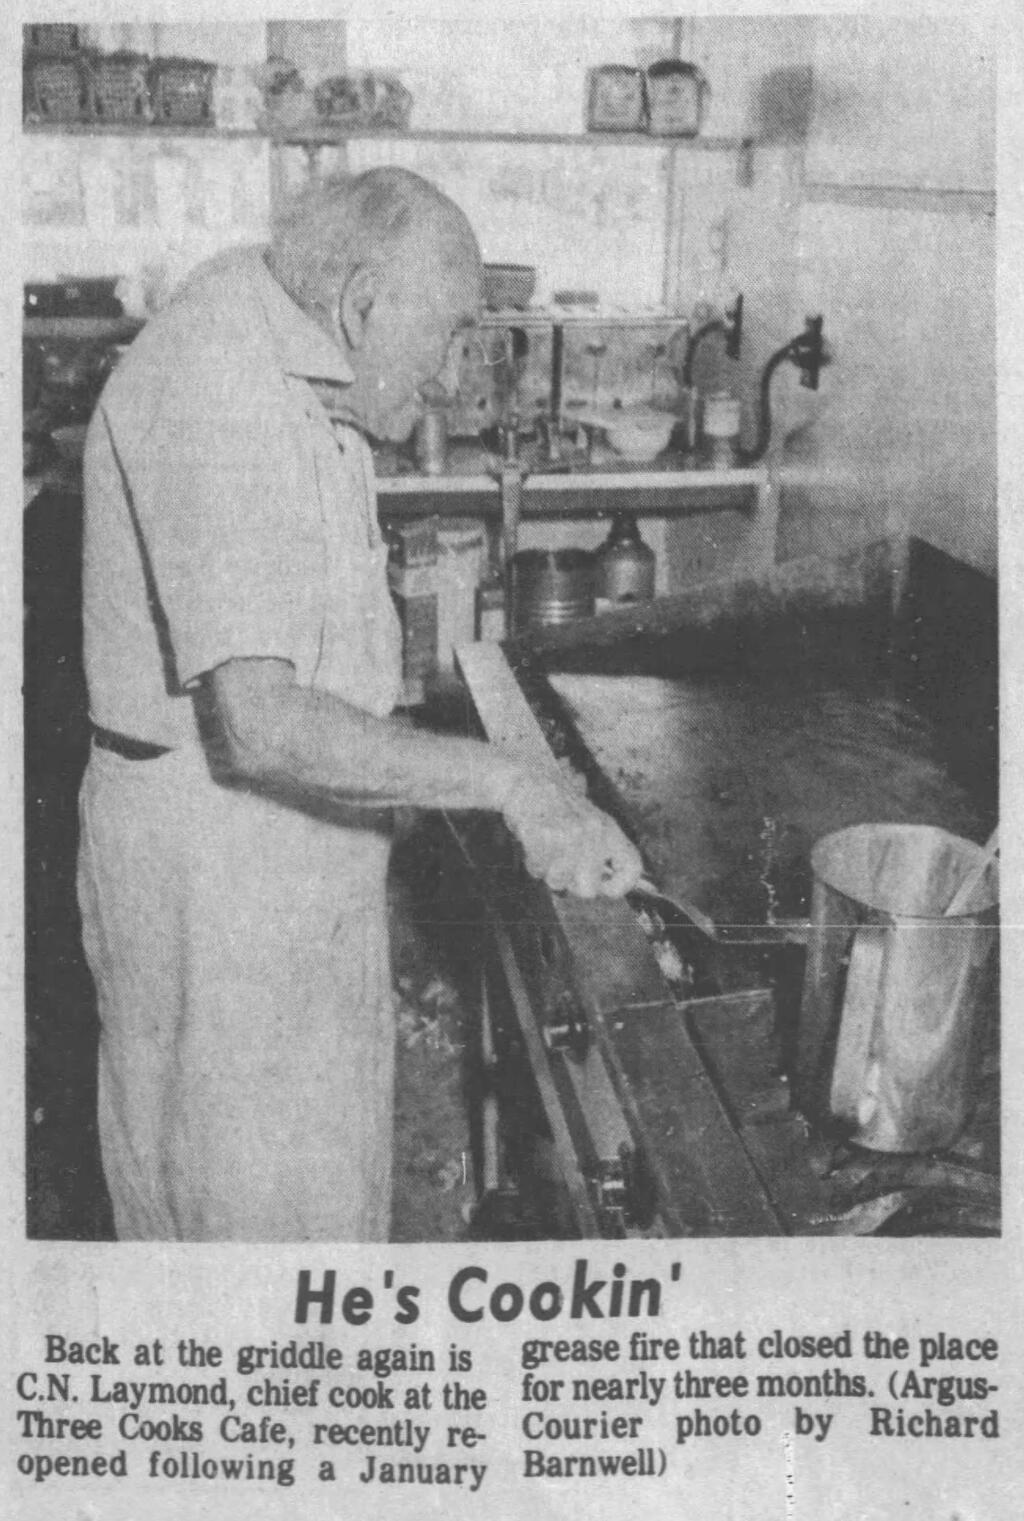 A 1978 Argus-Courier article featured a photo of Three Cooks Cafe chef C.N. Laymond.